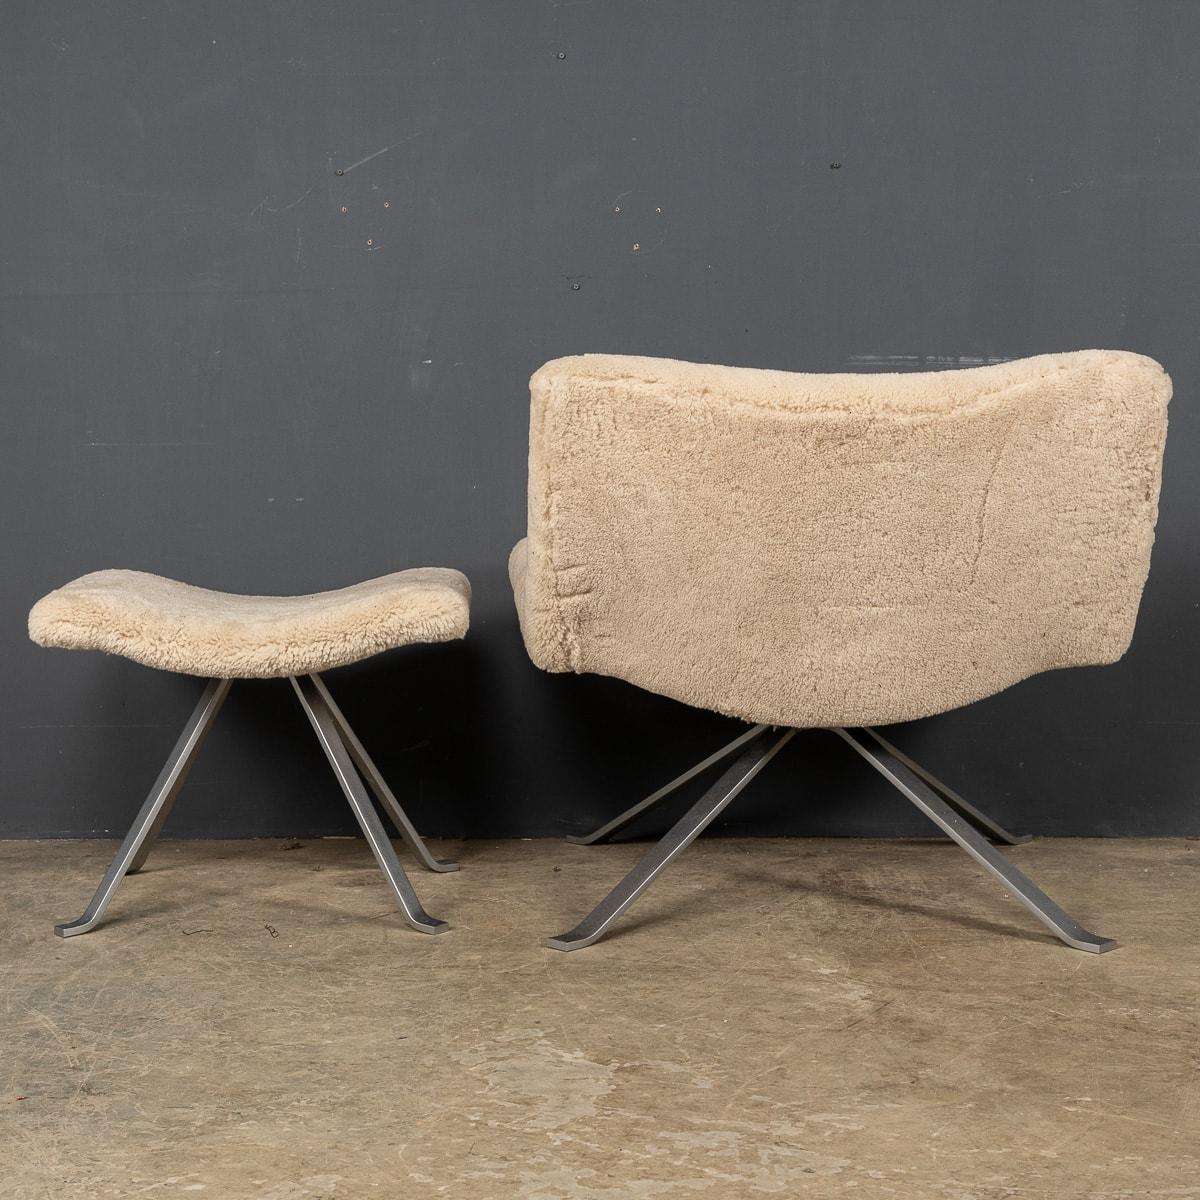 Metal 20th Century Italian Swivel Chairs with Matching Foot Stools, circa 1970 For Sale